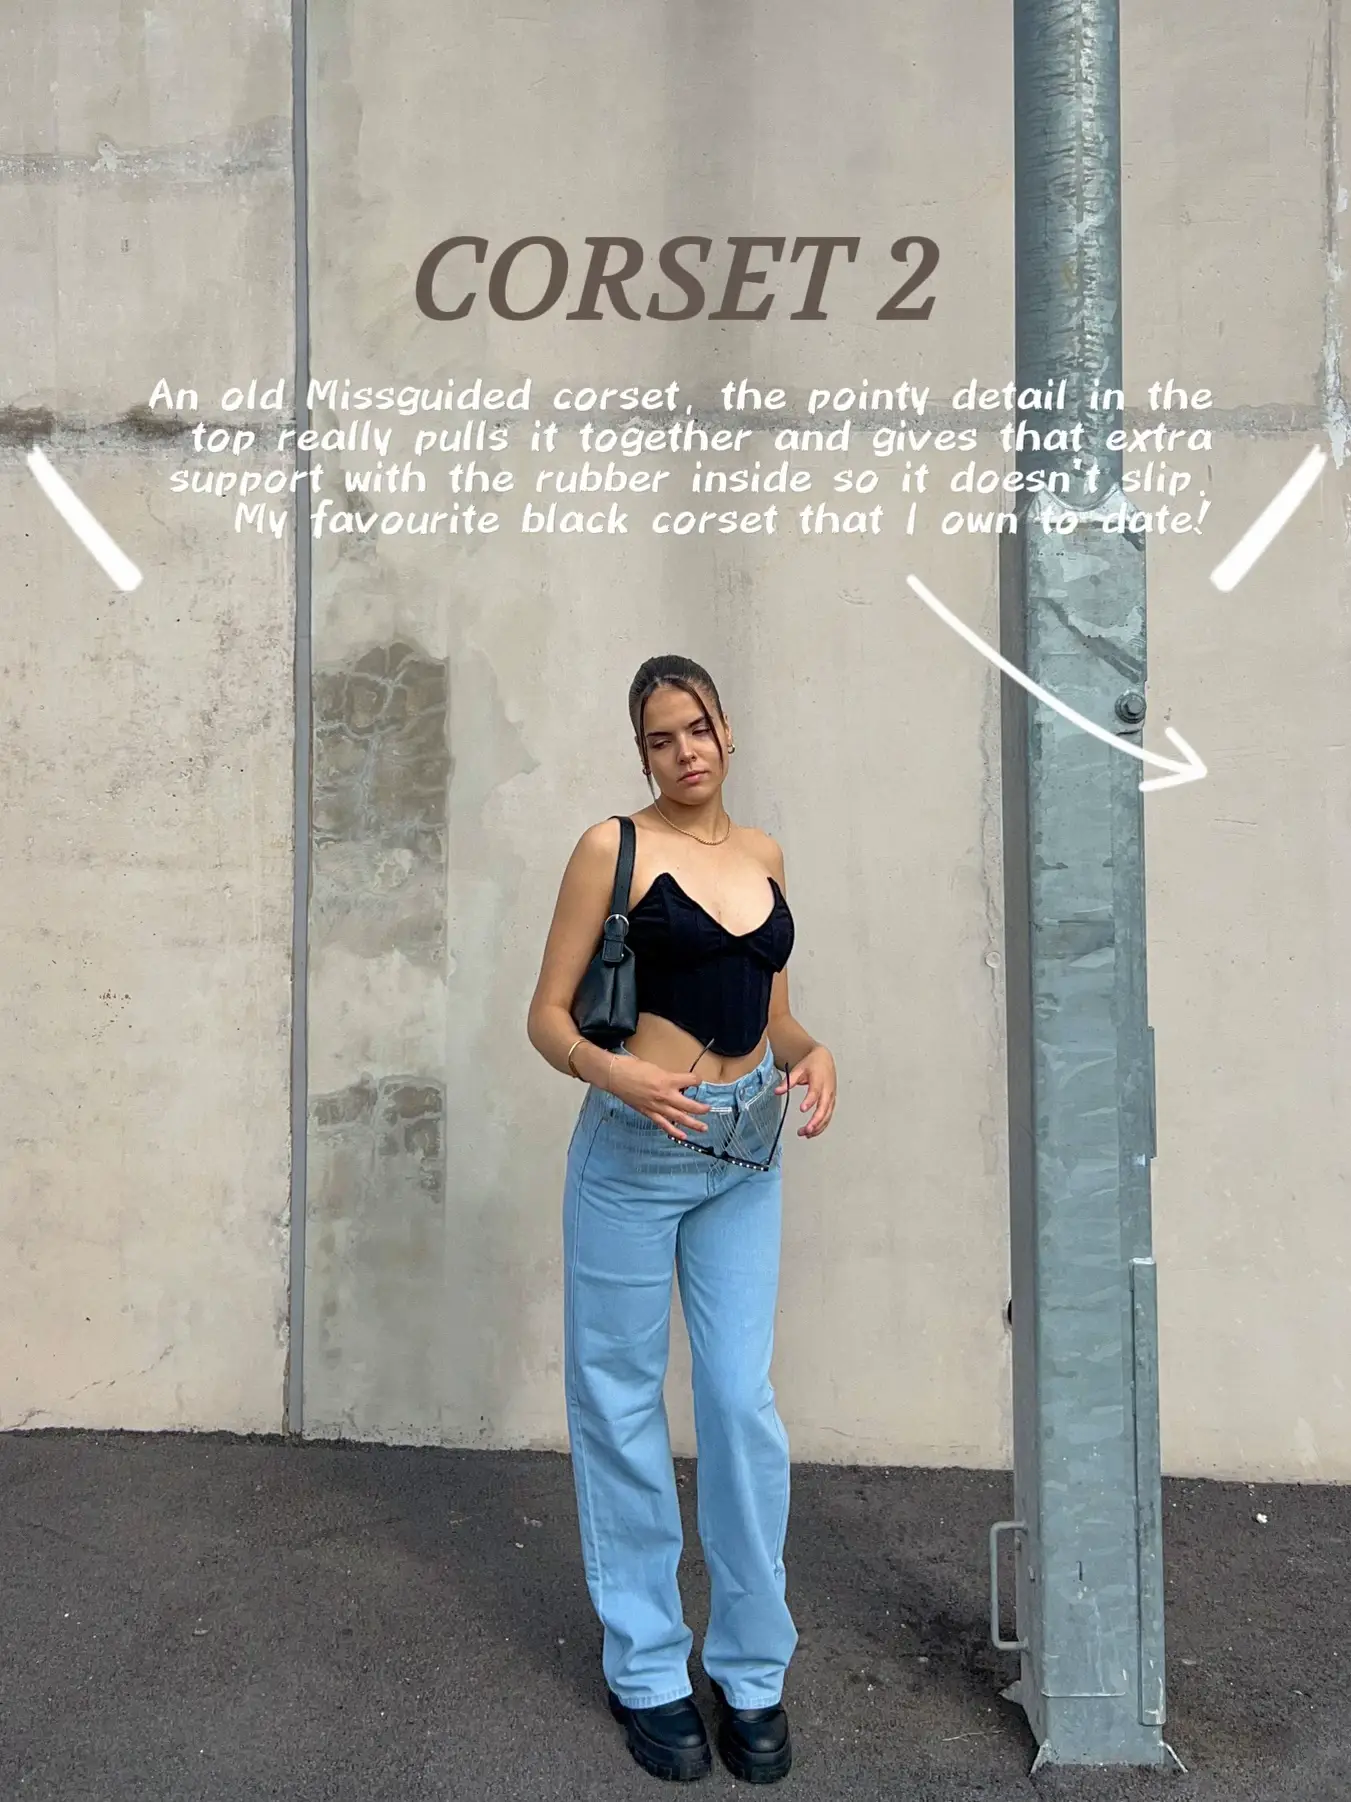 How to style a Corset 🫶, Gallery posted by Millicentrose